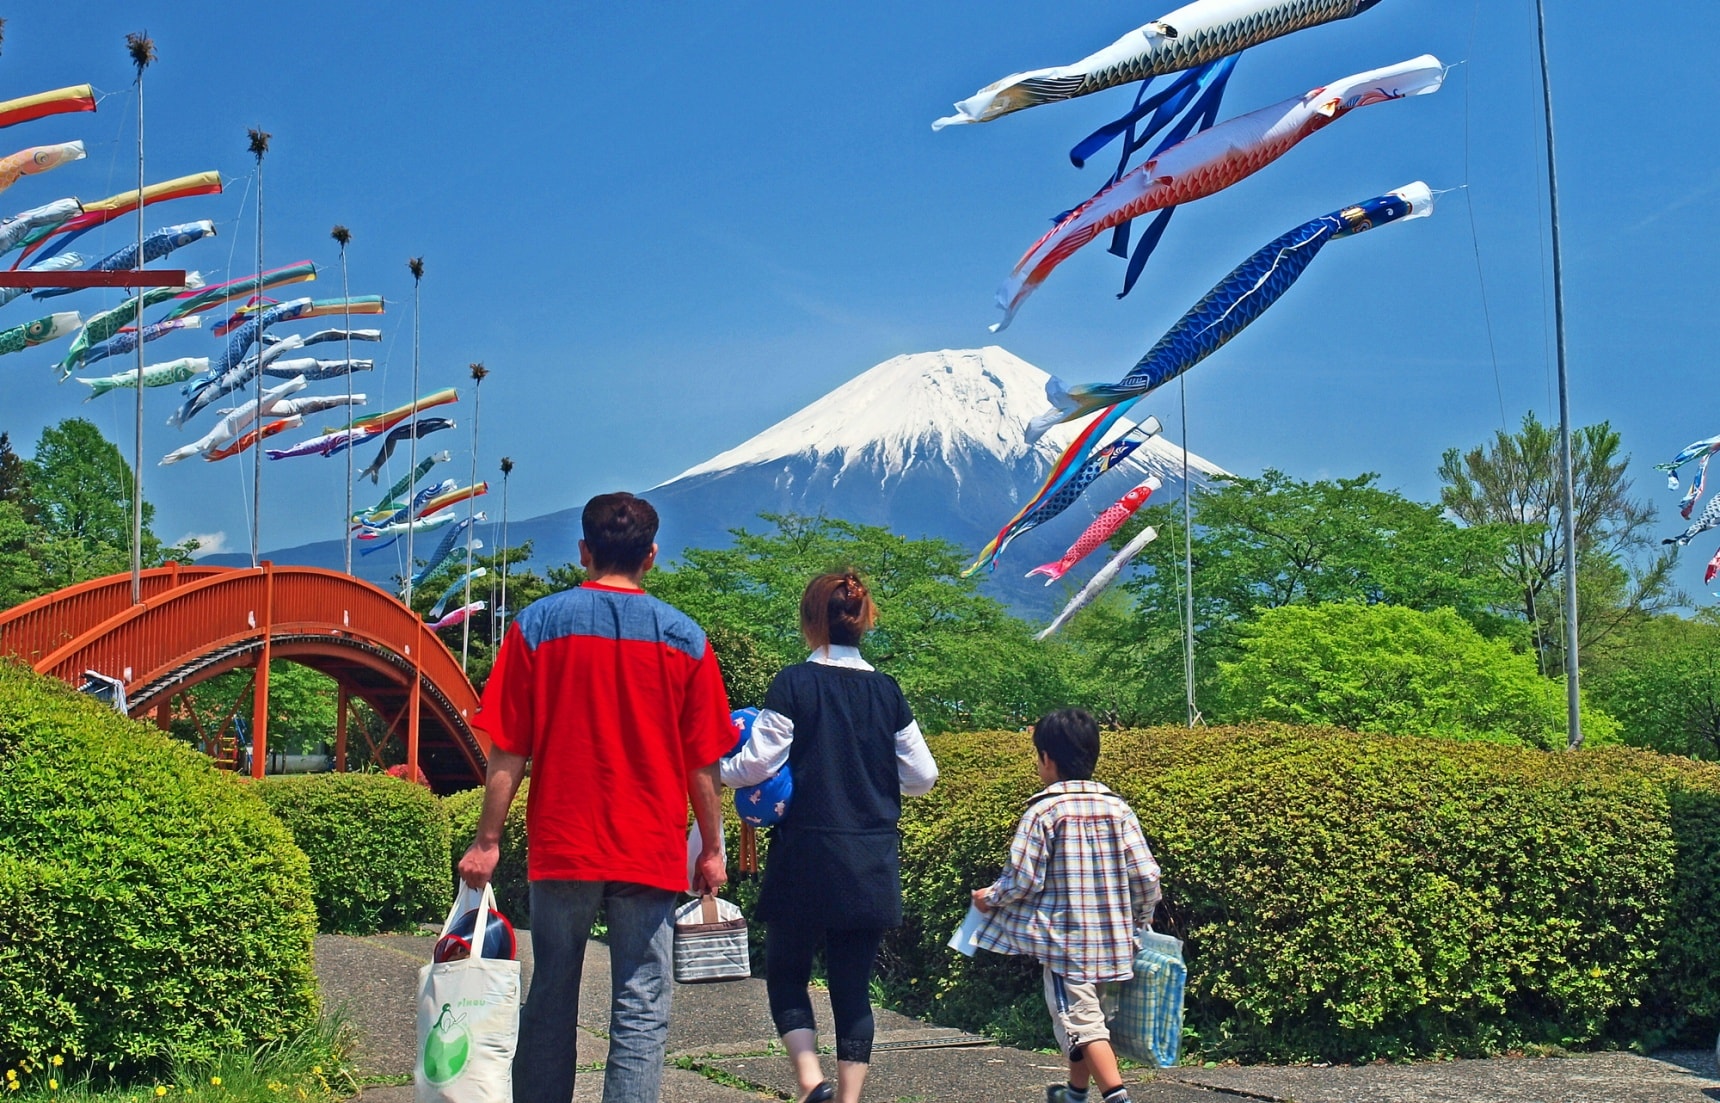 How Are You Spending Your Golden Week? | All About Japan